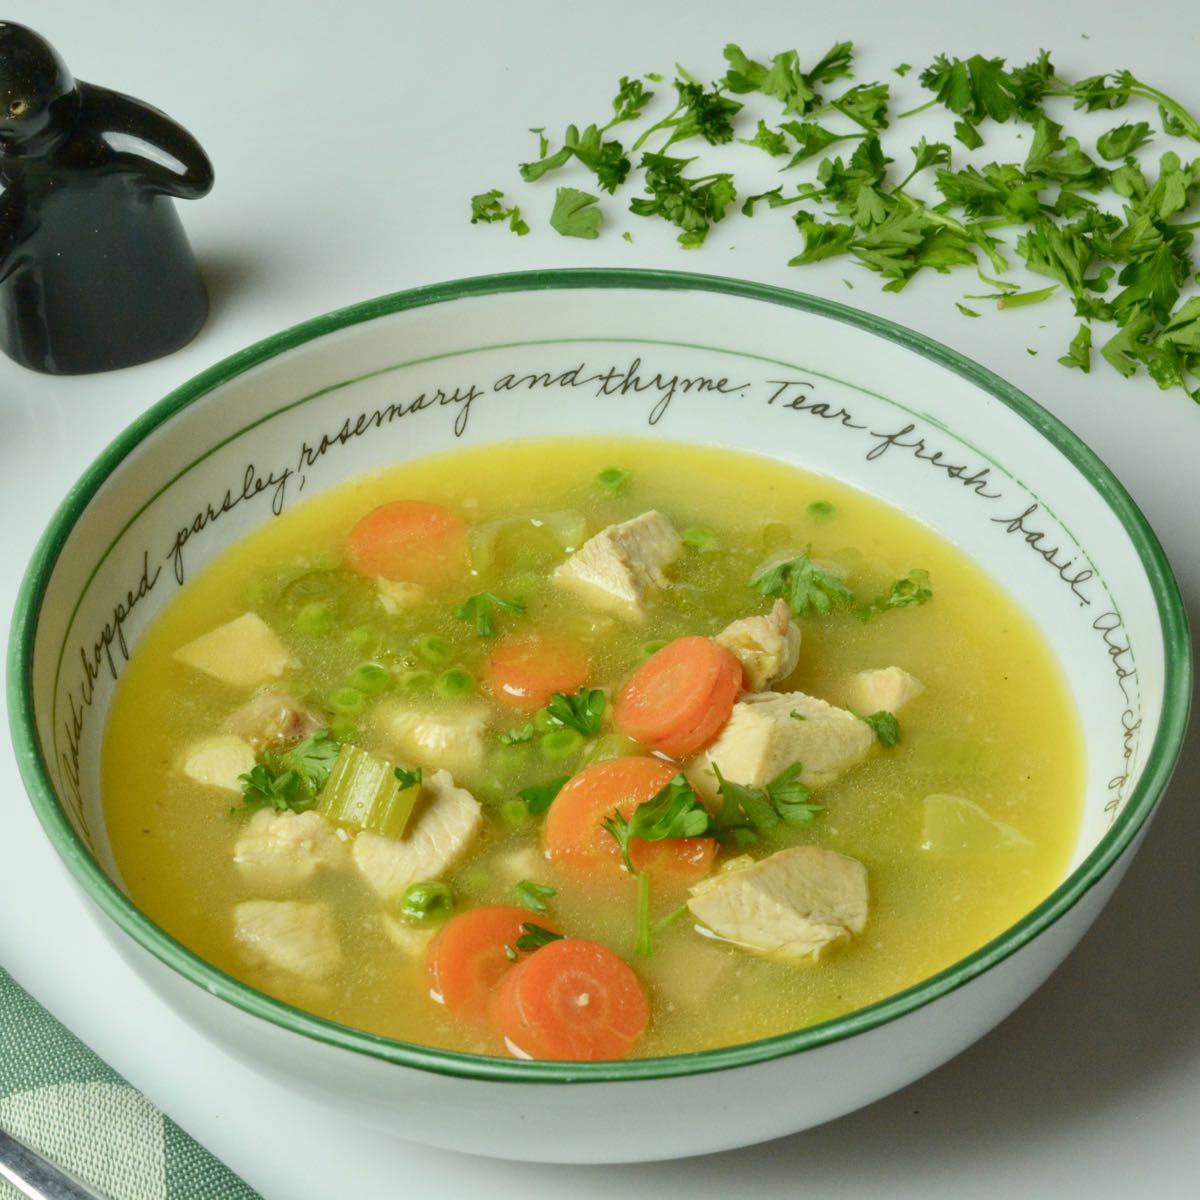 A full bowl of homemade Turkey Soup with carrots and peas.